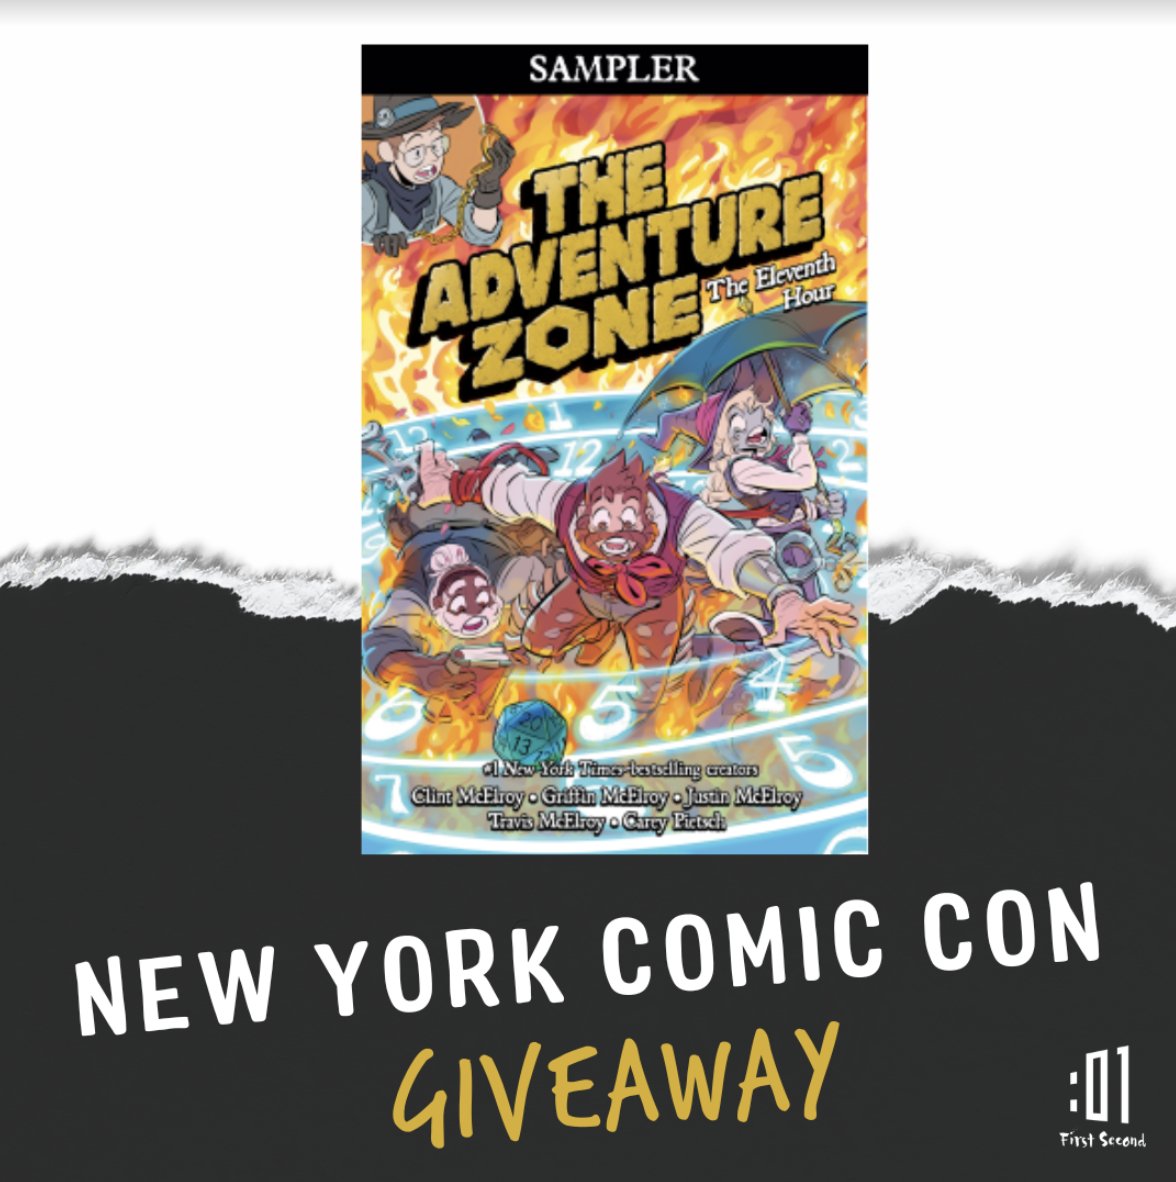 I'm so excited that @01FirstSecond has postcards at NYCC booth 3027 that will get you access to a BIG sampler set of pages from @TheZoneCast: The Eleventh Hour GN!! ⌛️🔥I hear they may also have some lenticular stickers...? ✨👀 #thezonecast #tazgn theadventurezonecomic.com